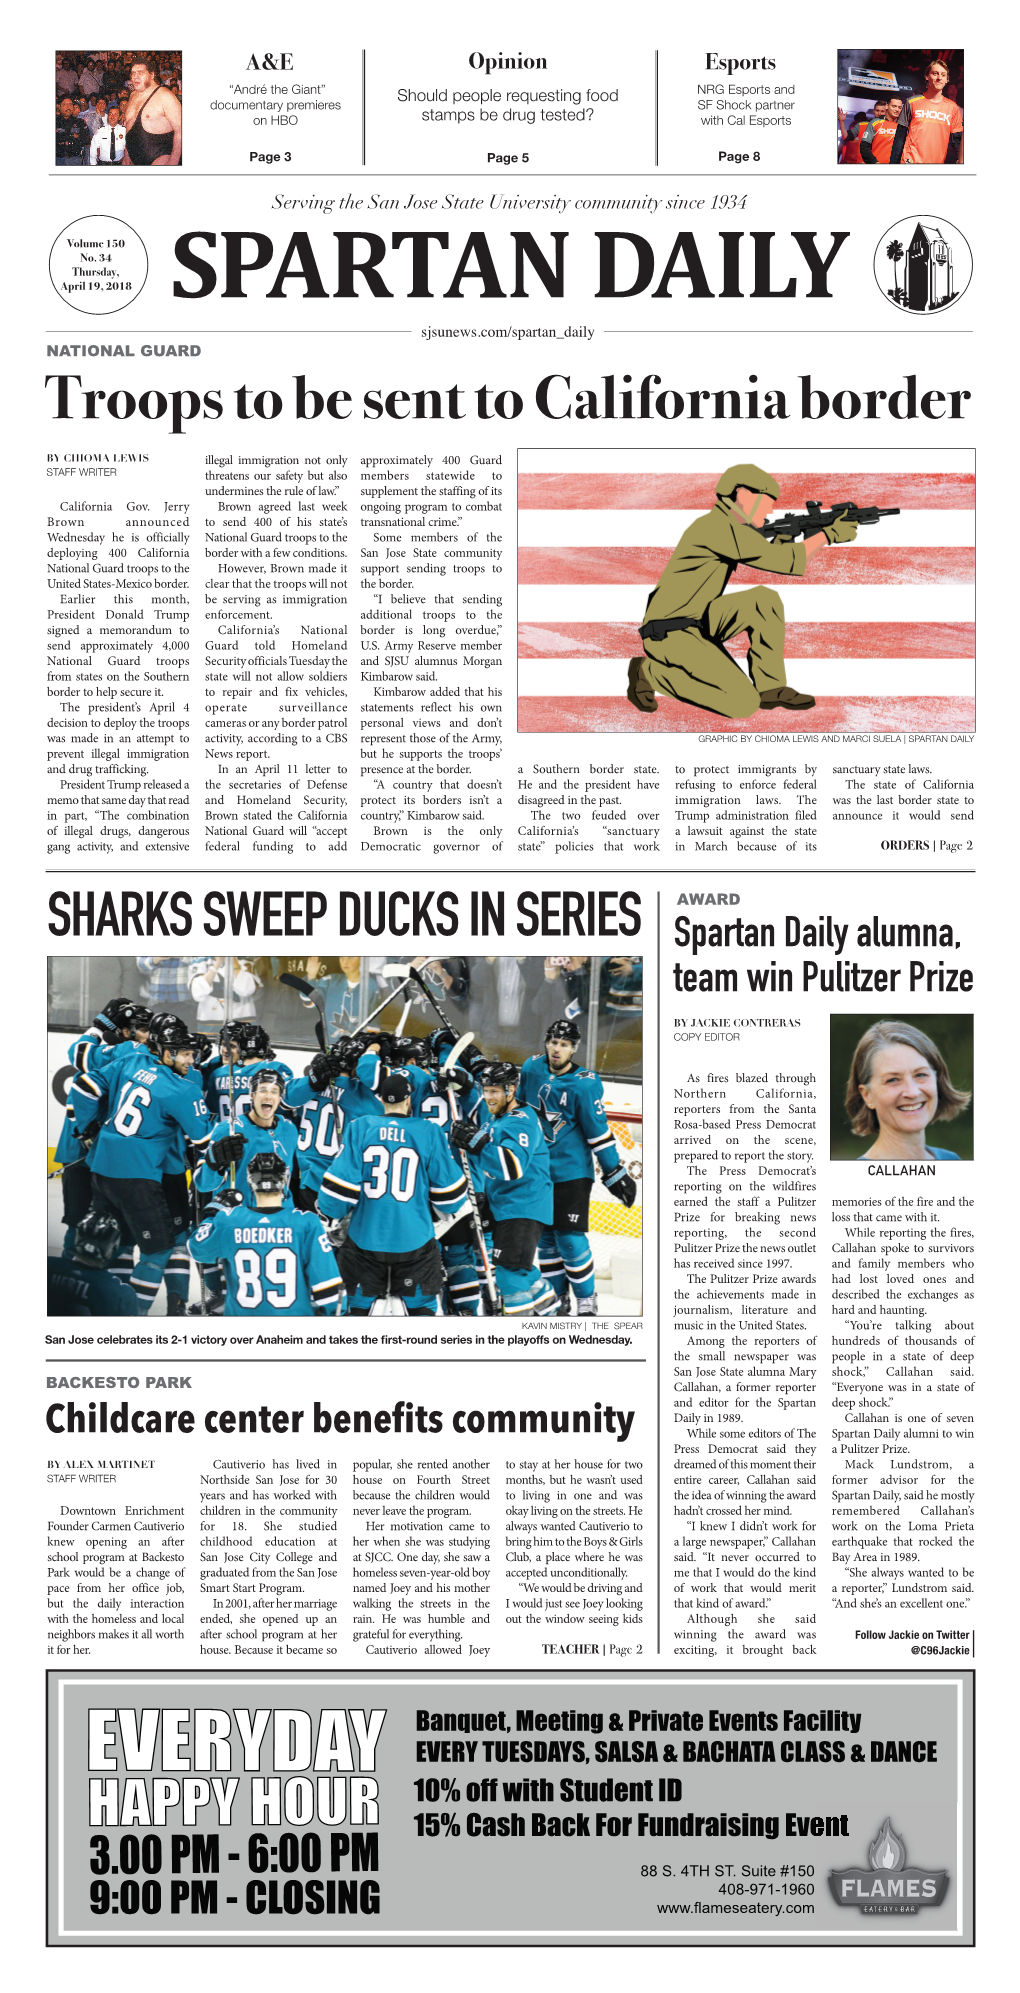 Troops to Be Sent to California Border SHARKS SWEEP DUCKS in SERIES